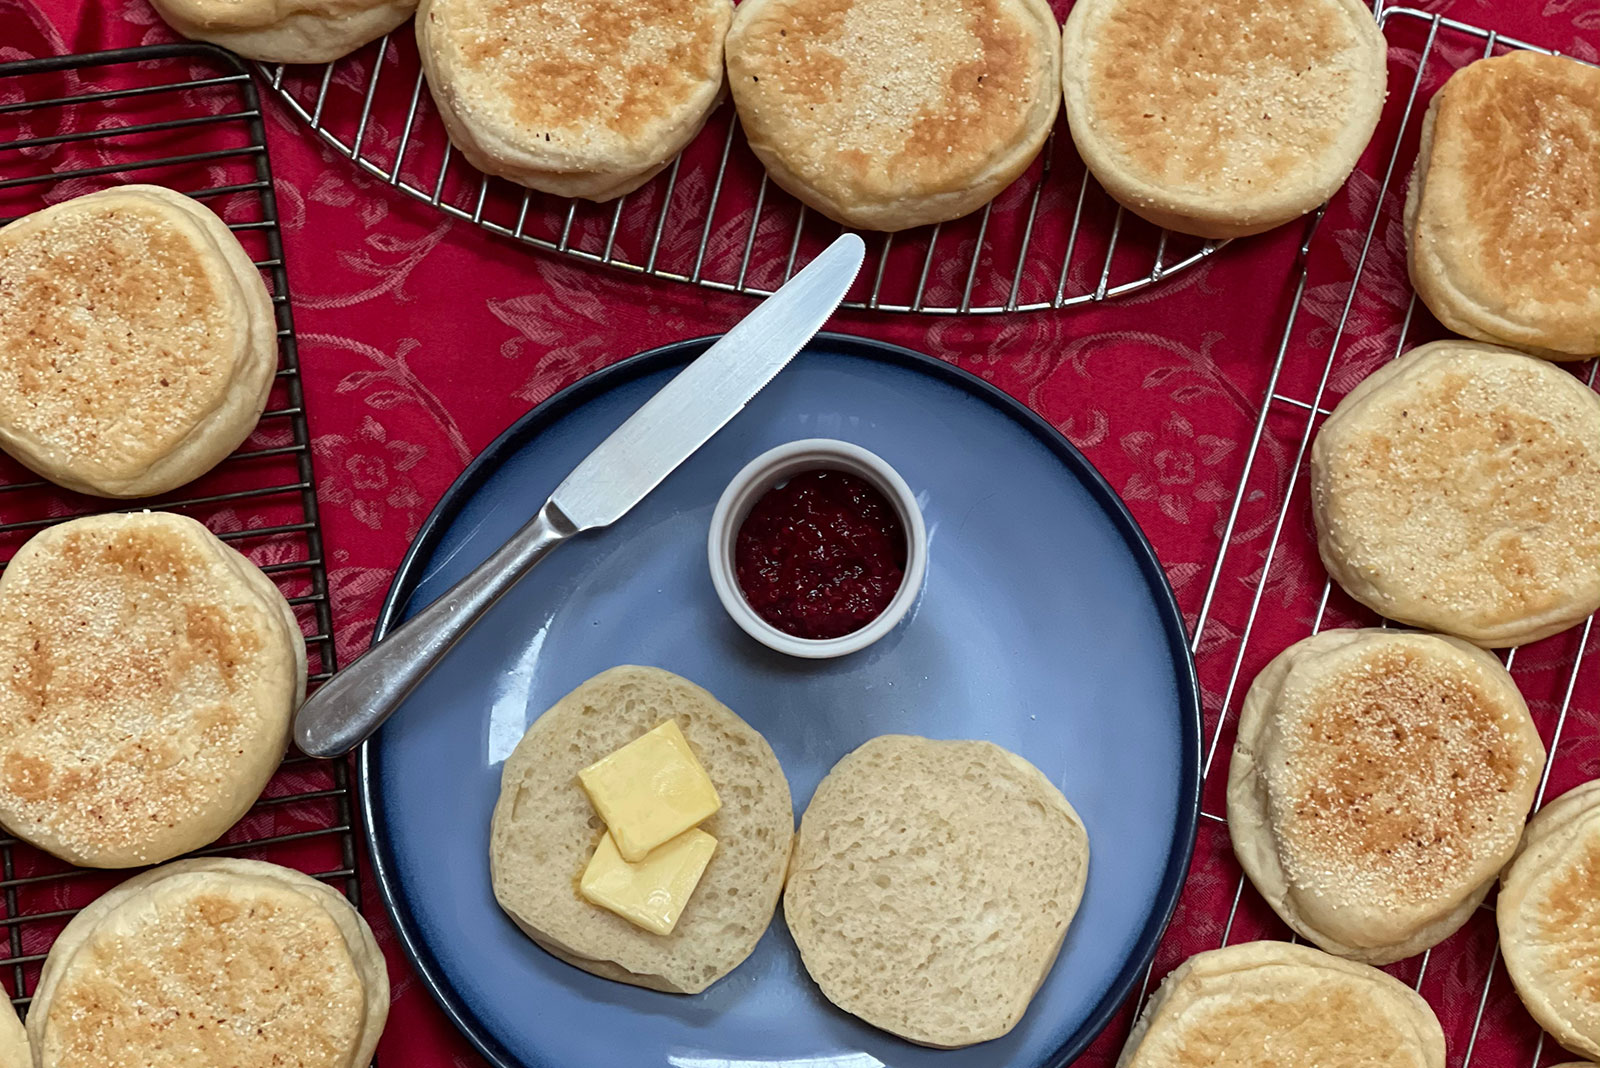 English muffins cooling on racks around a blue plate with jam, butter, and a knife